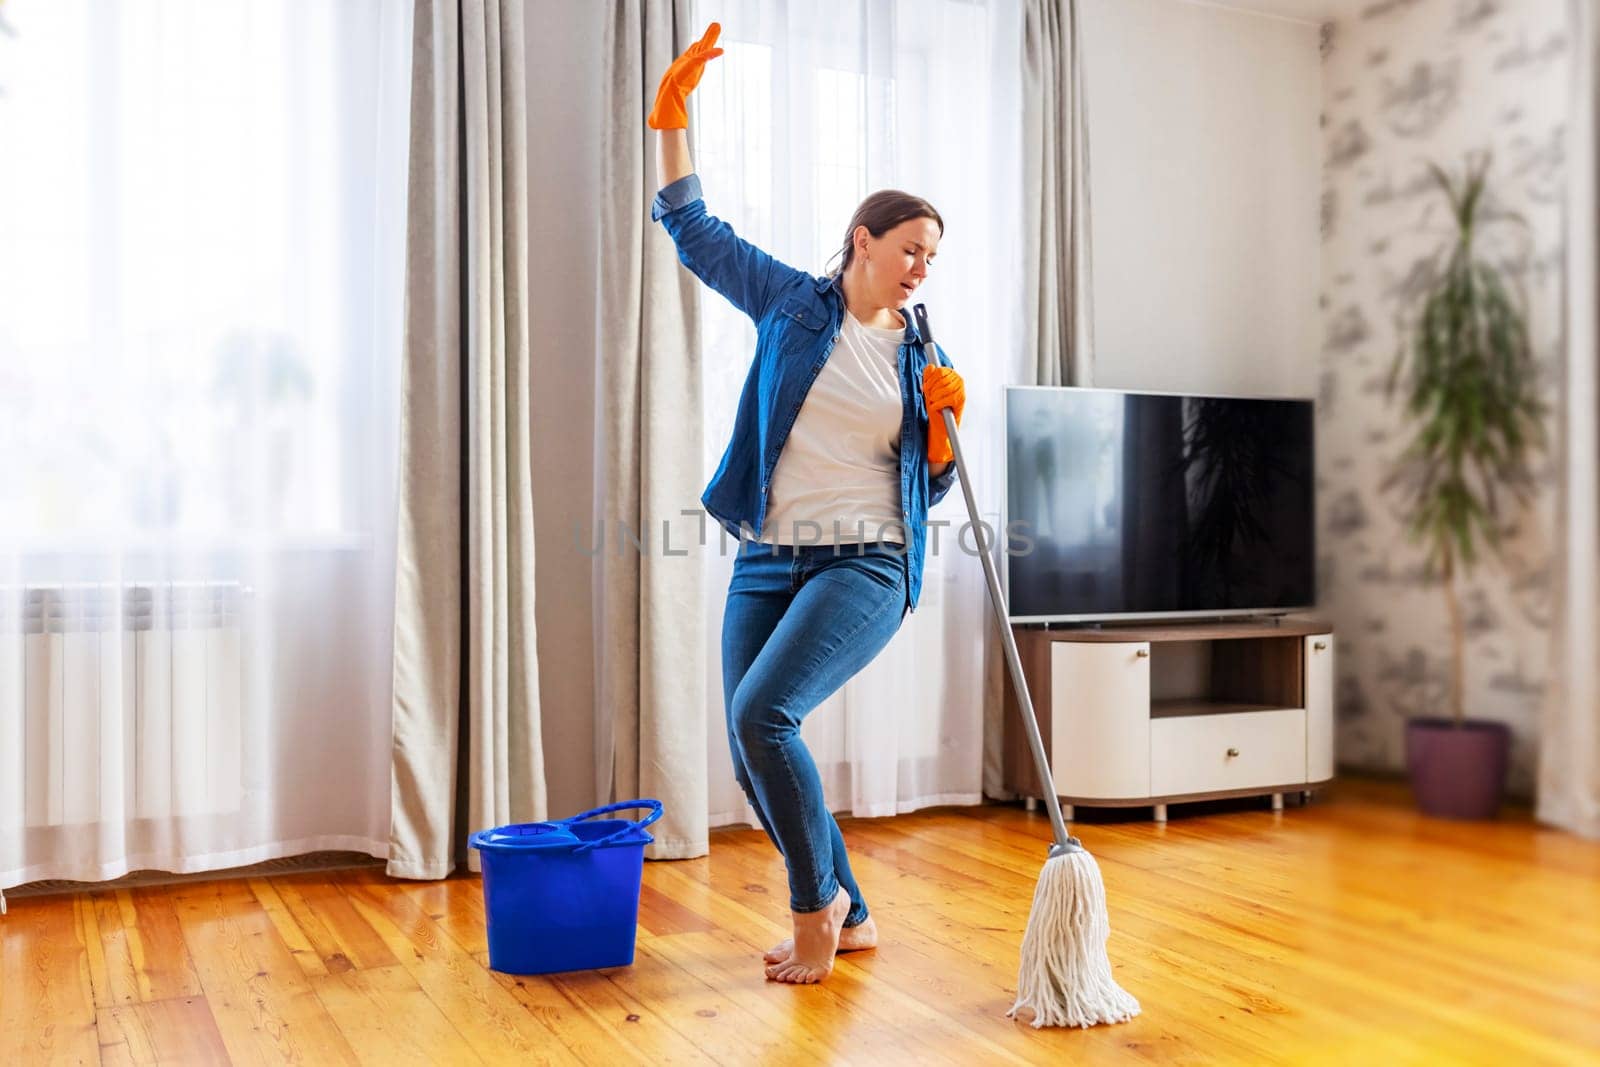 Funny happy young woman with mop singing, dancing and having fun while cleaning floor. Housewife enjoying domestic chores, doing home cleanup creatively